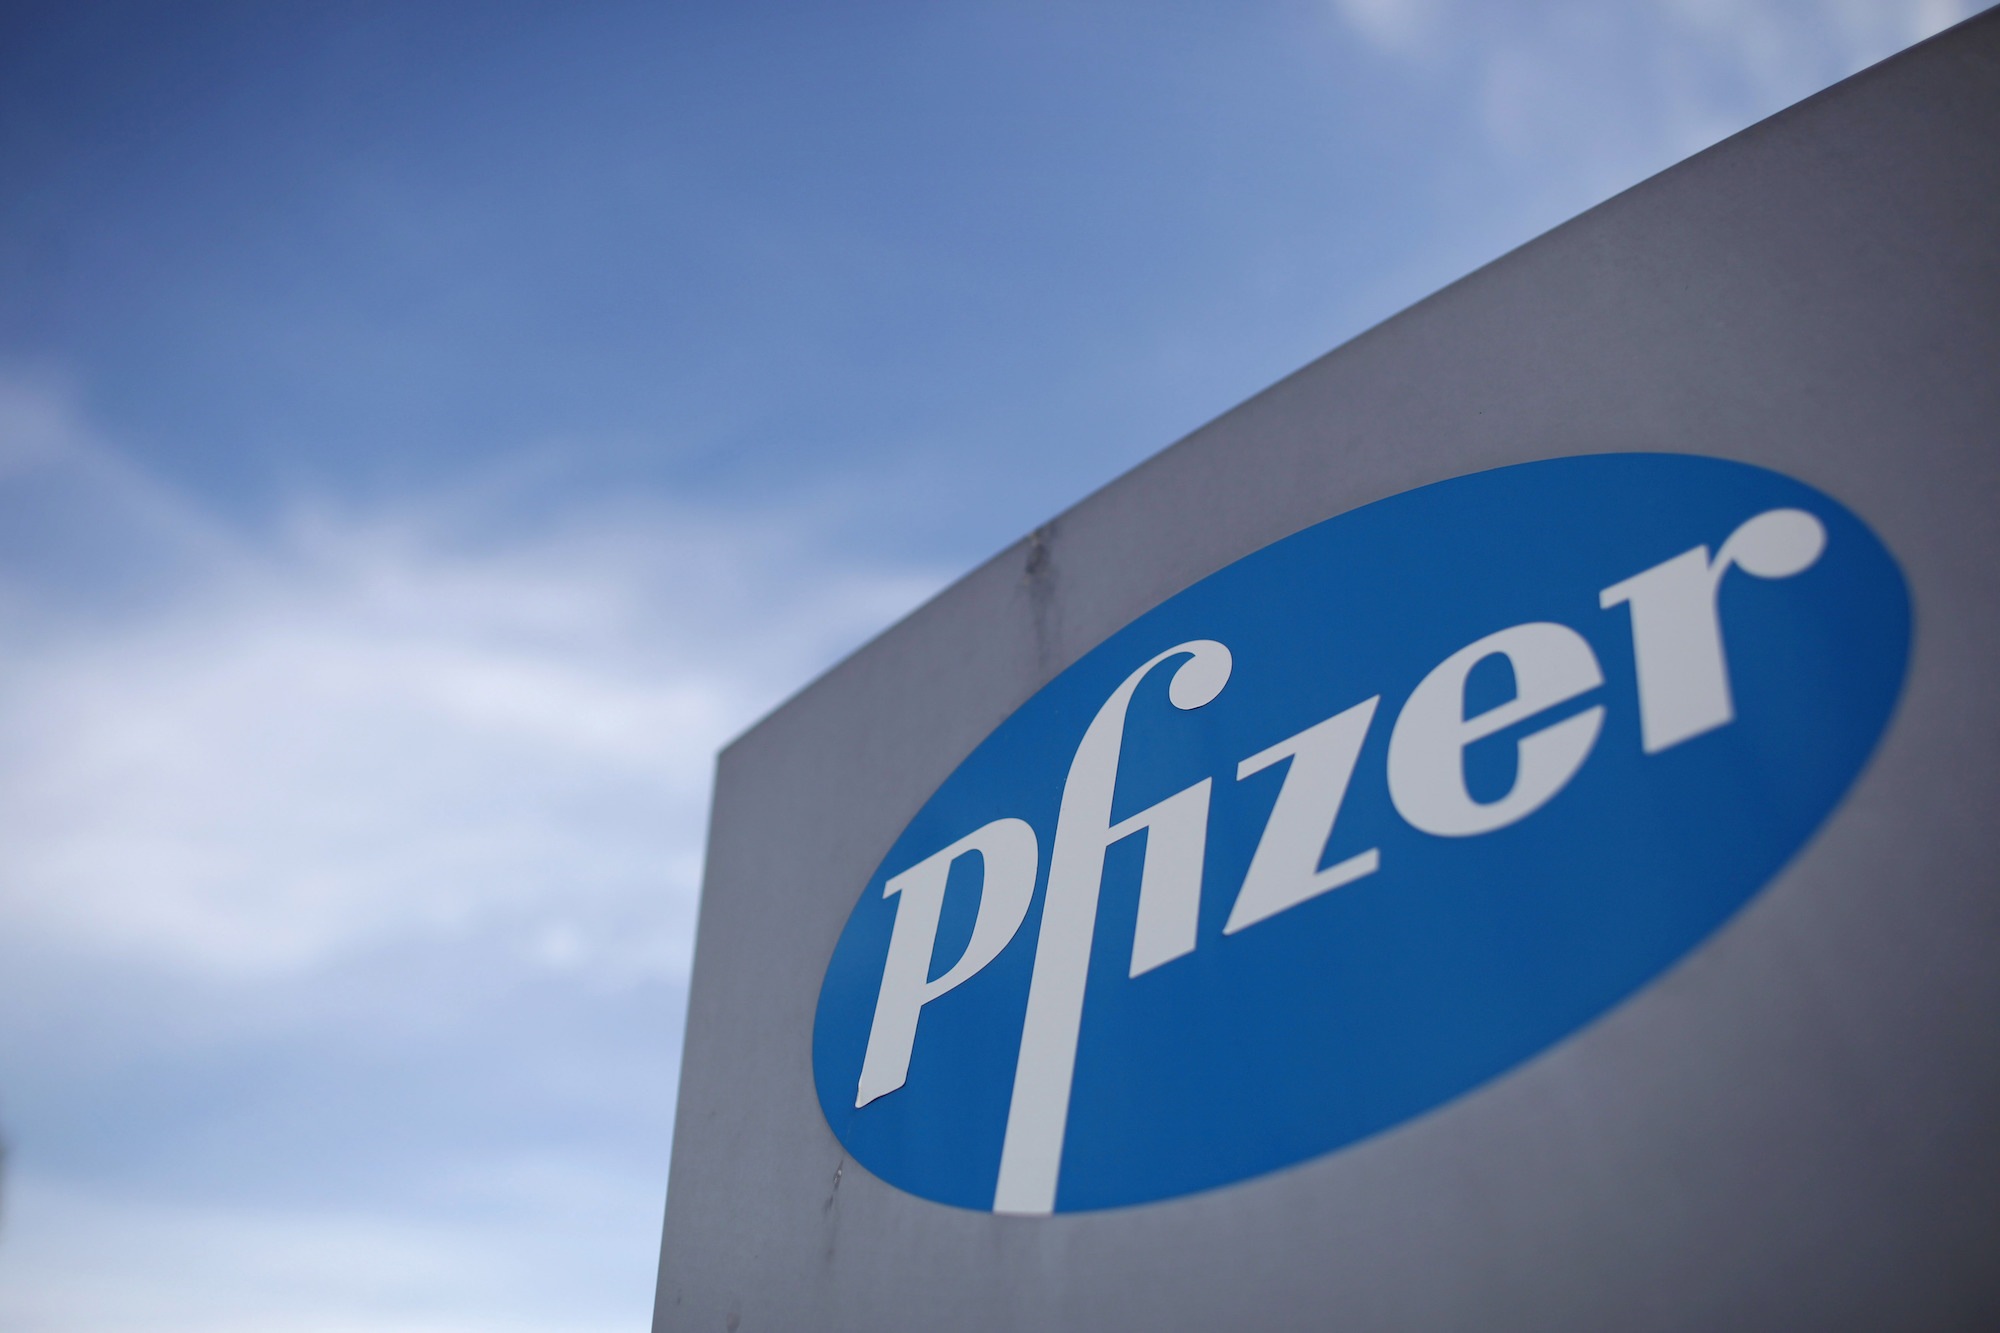 Flynn and Pfizer fined £70m for overcharging NHS for epilepsy drugs Morning Star